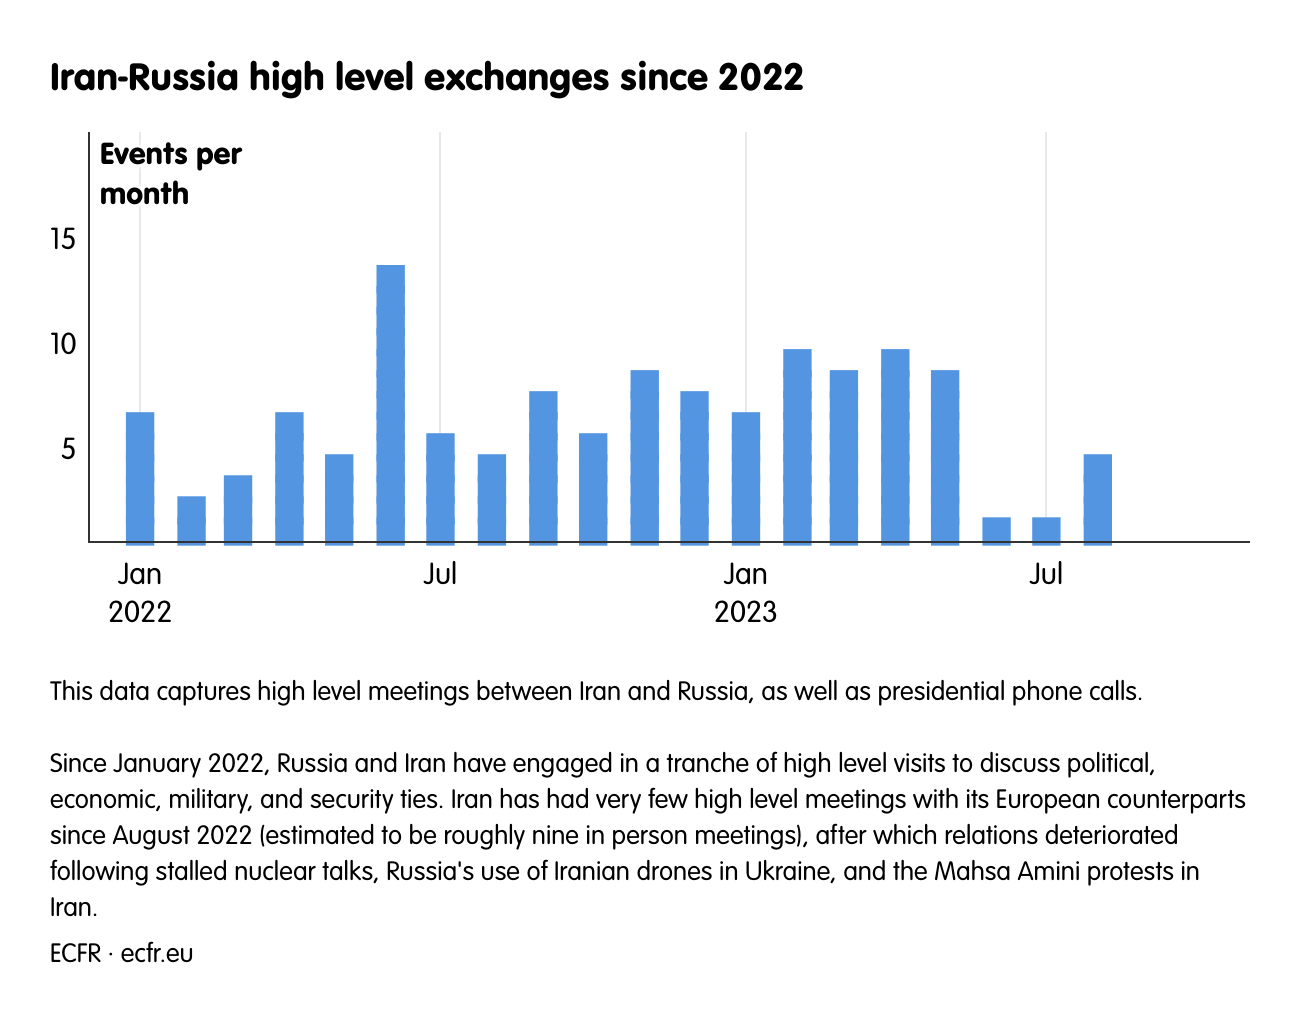 Iran-Russia high level exchanges since 2022